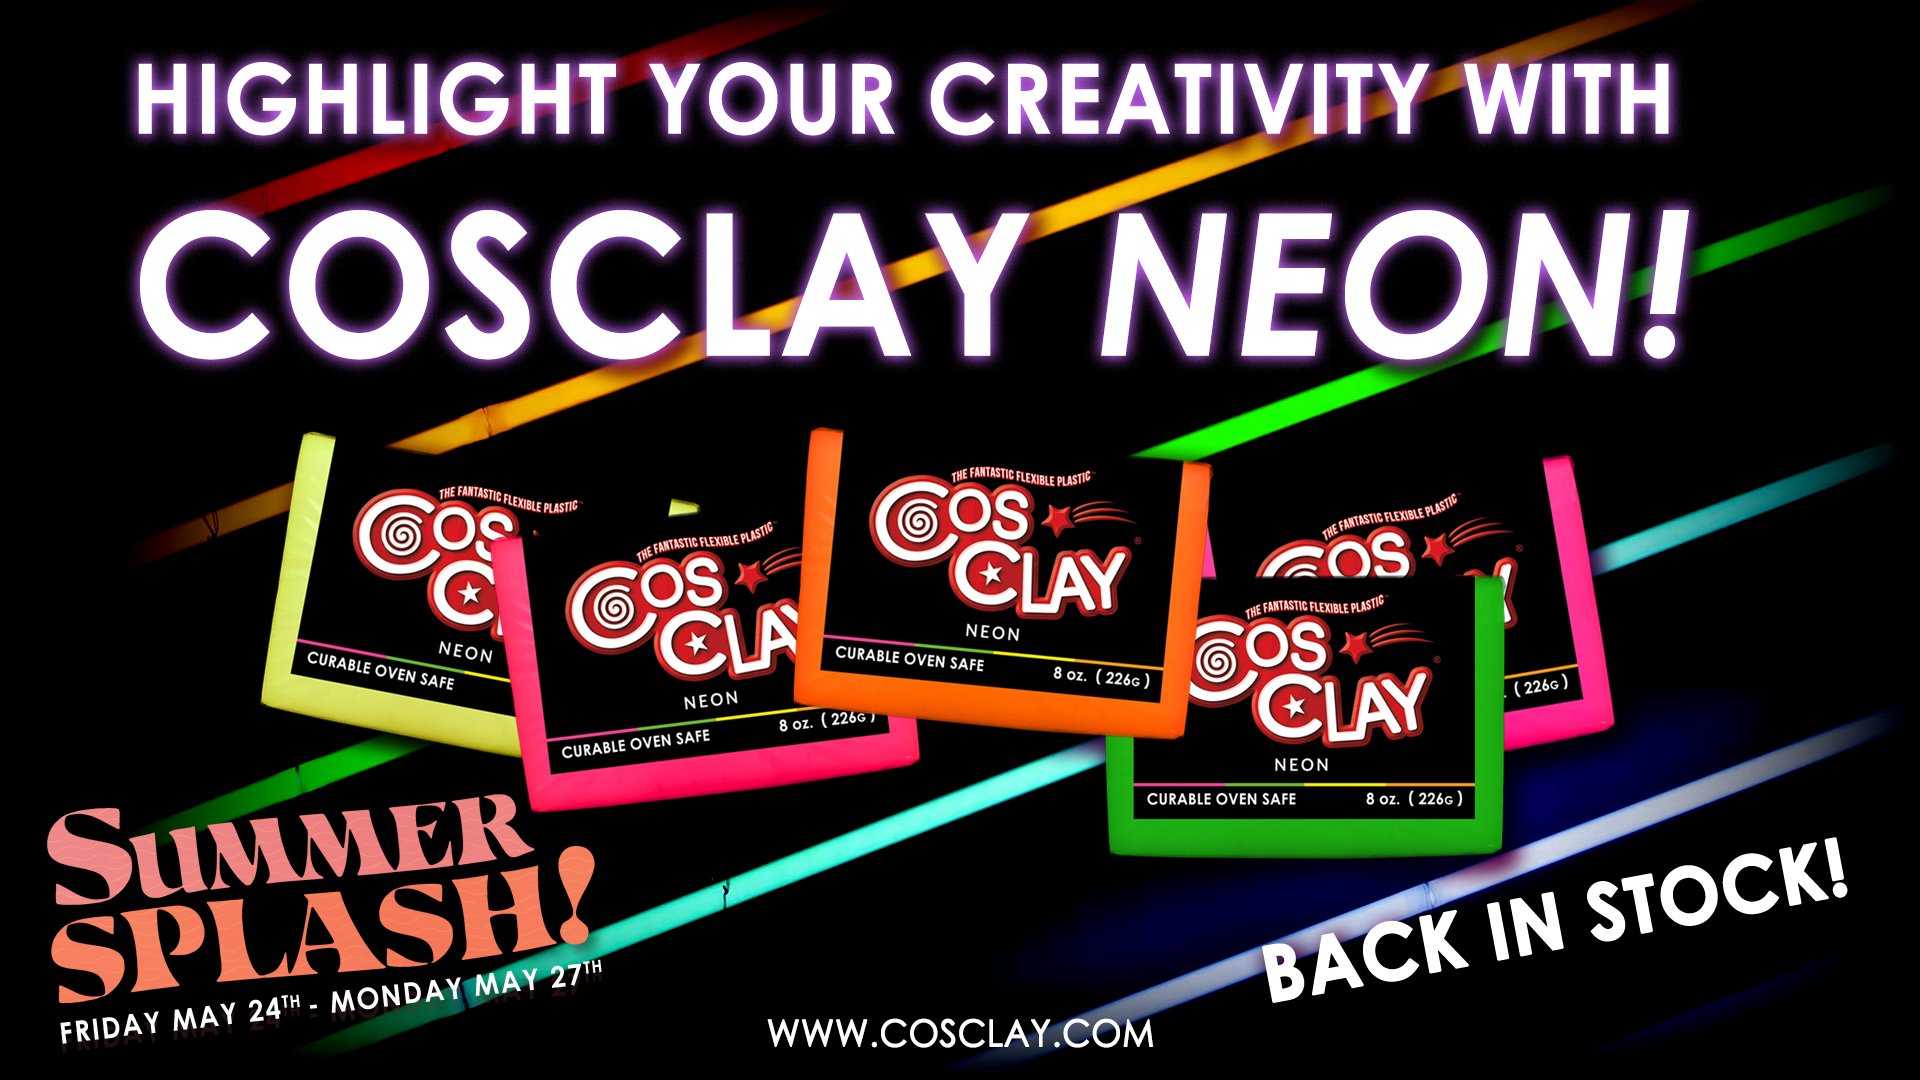 Hey, Cosclayer!
Highlight your creativity this Friday May 24th through Monday May 27th during our Summer Splash sale!
+The long awaited restock of our best selling NEON and LUSTER lines.
+The first 50 Orders will receive a BRAND NEW - UNRELEASED prod